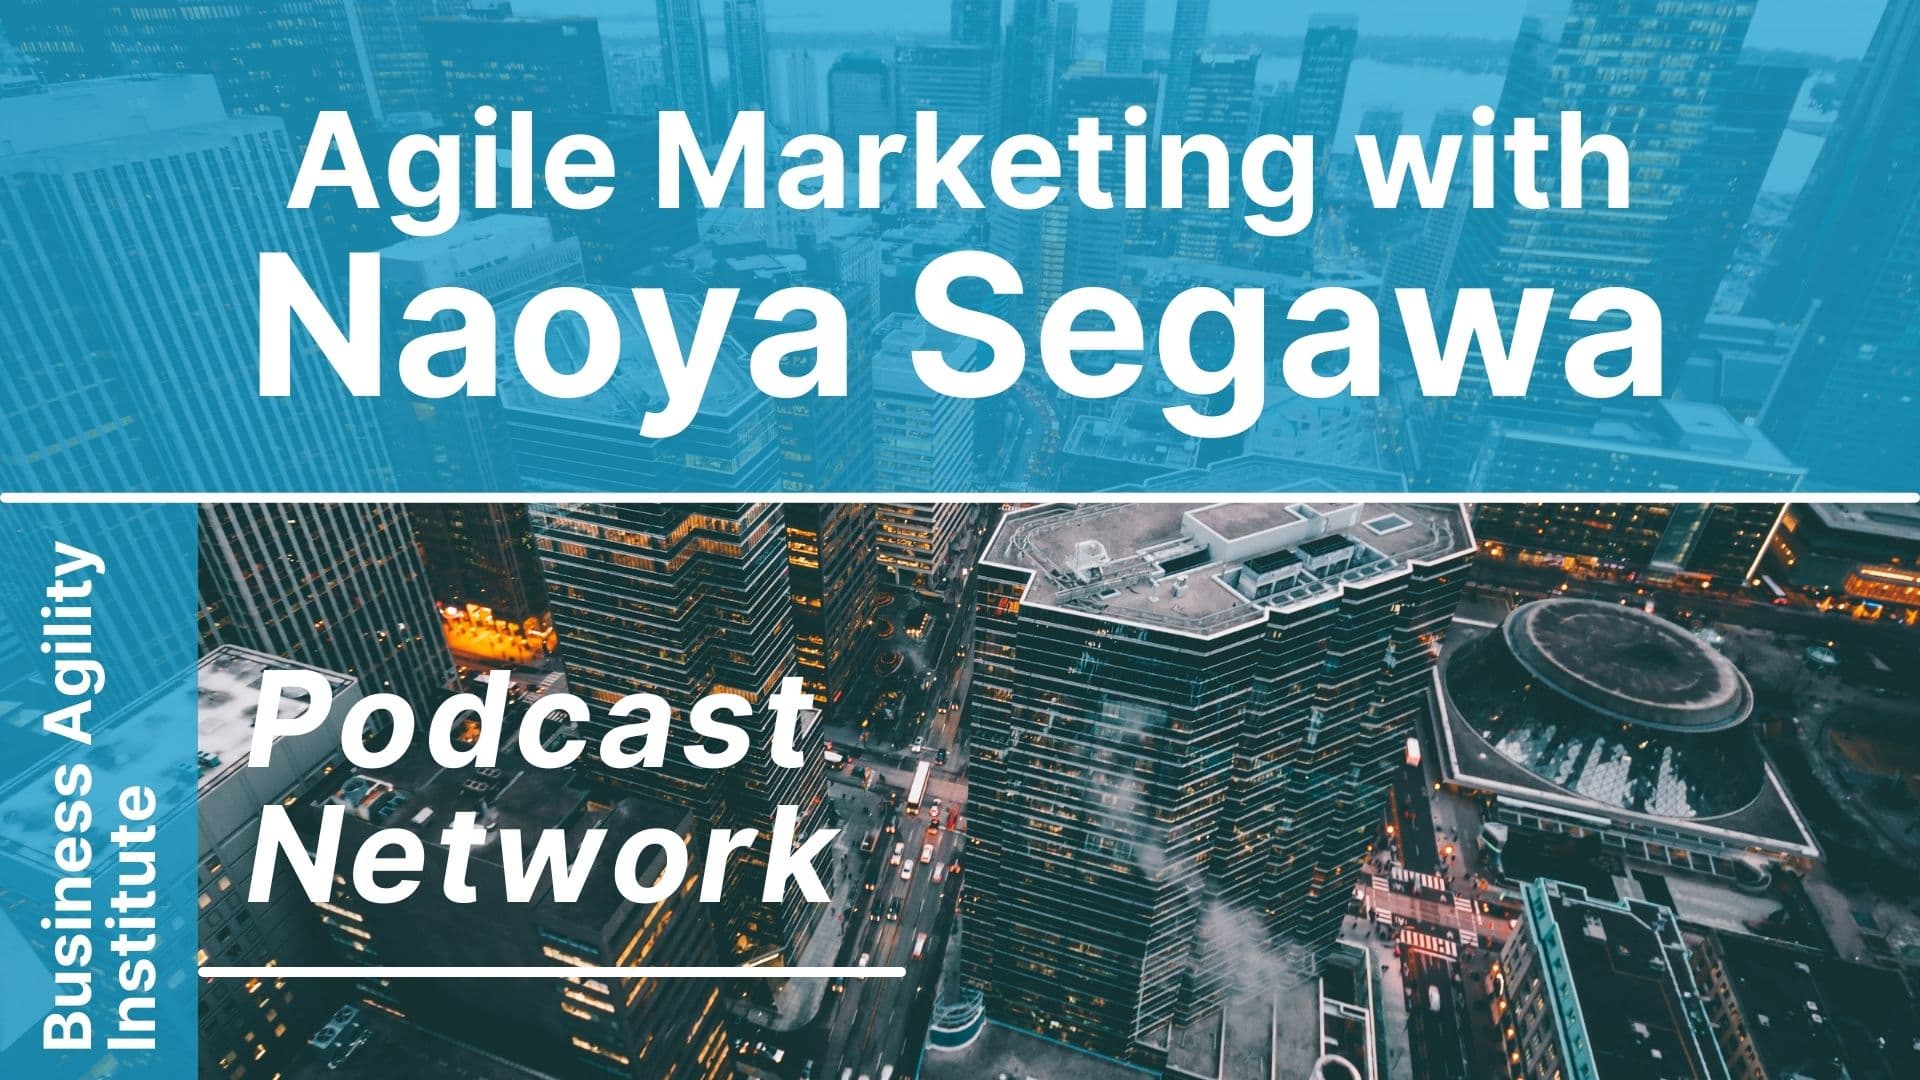 Agile Marketing in Japan in the Age of COVID-19